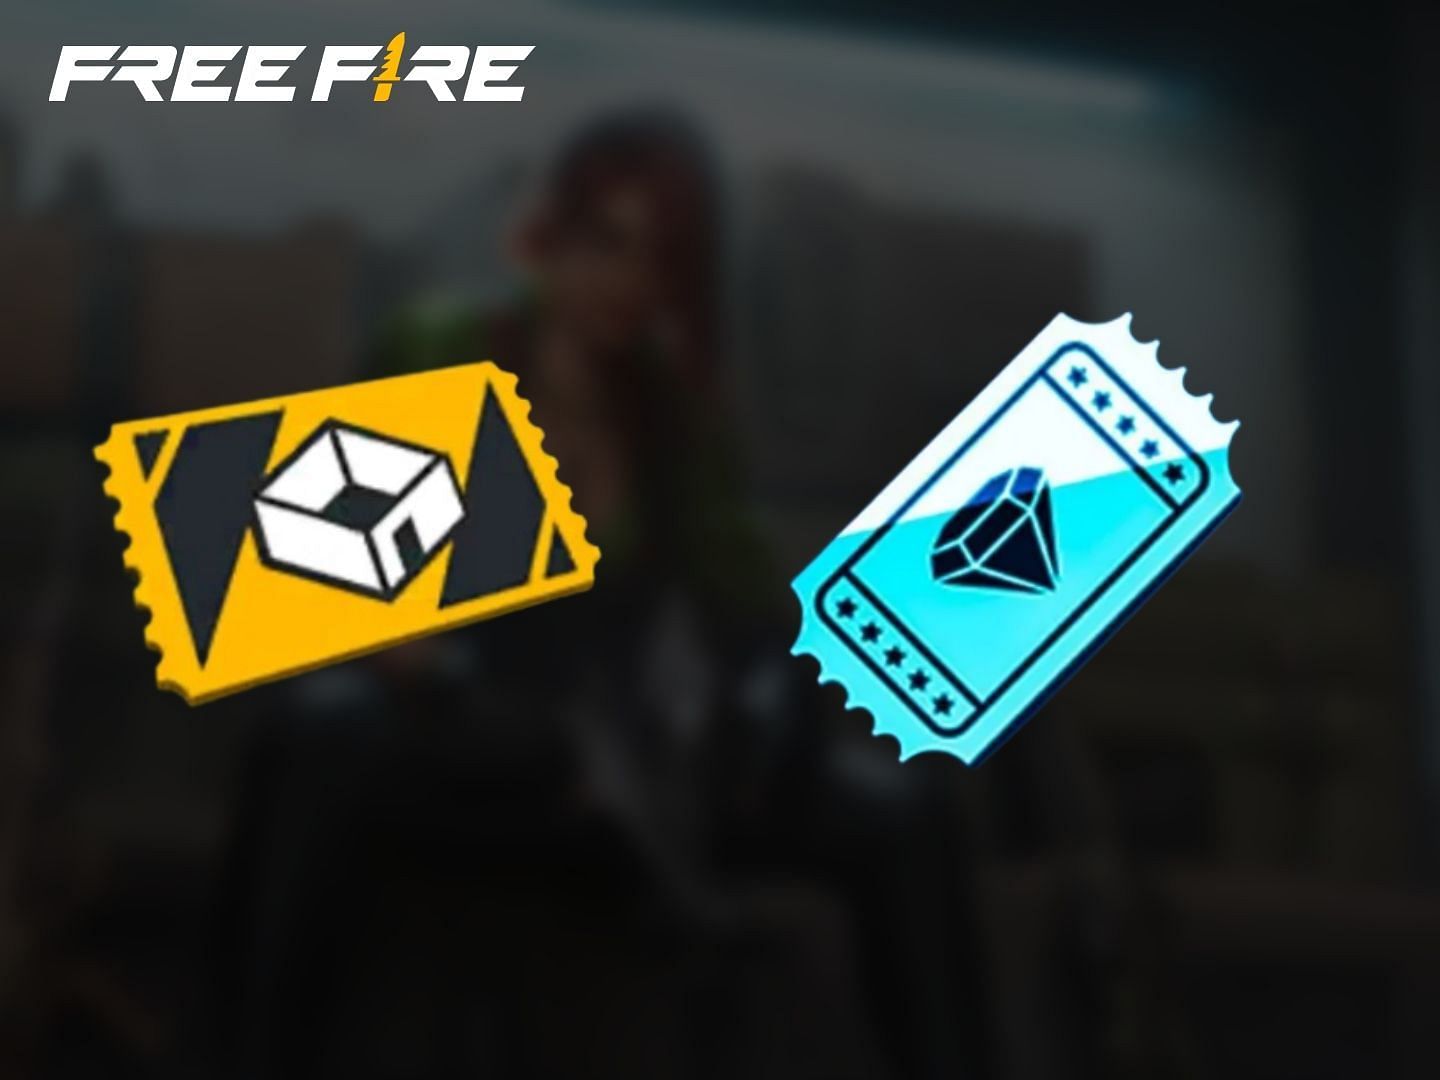 Get free room cards and vouchers from the Free Fire redeem codes below (Image via Sportskeeda)